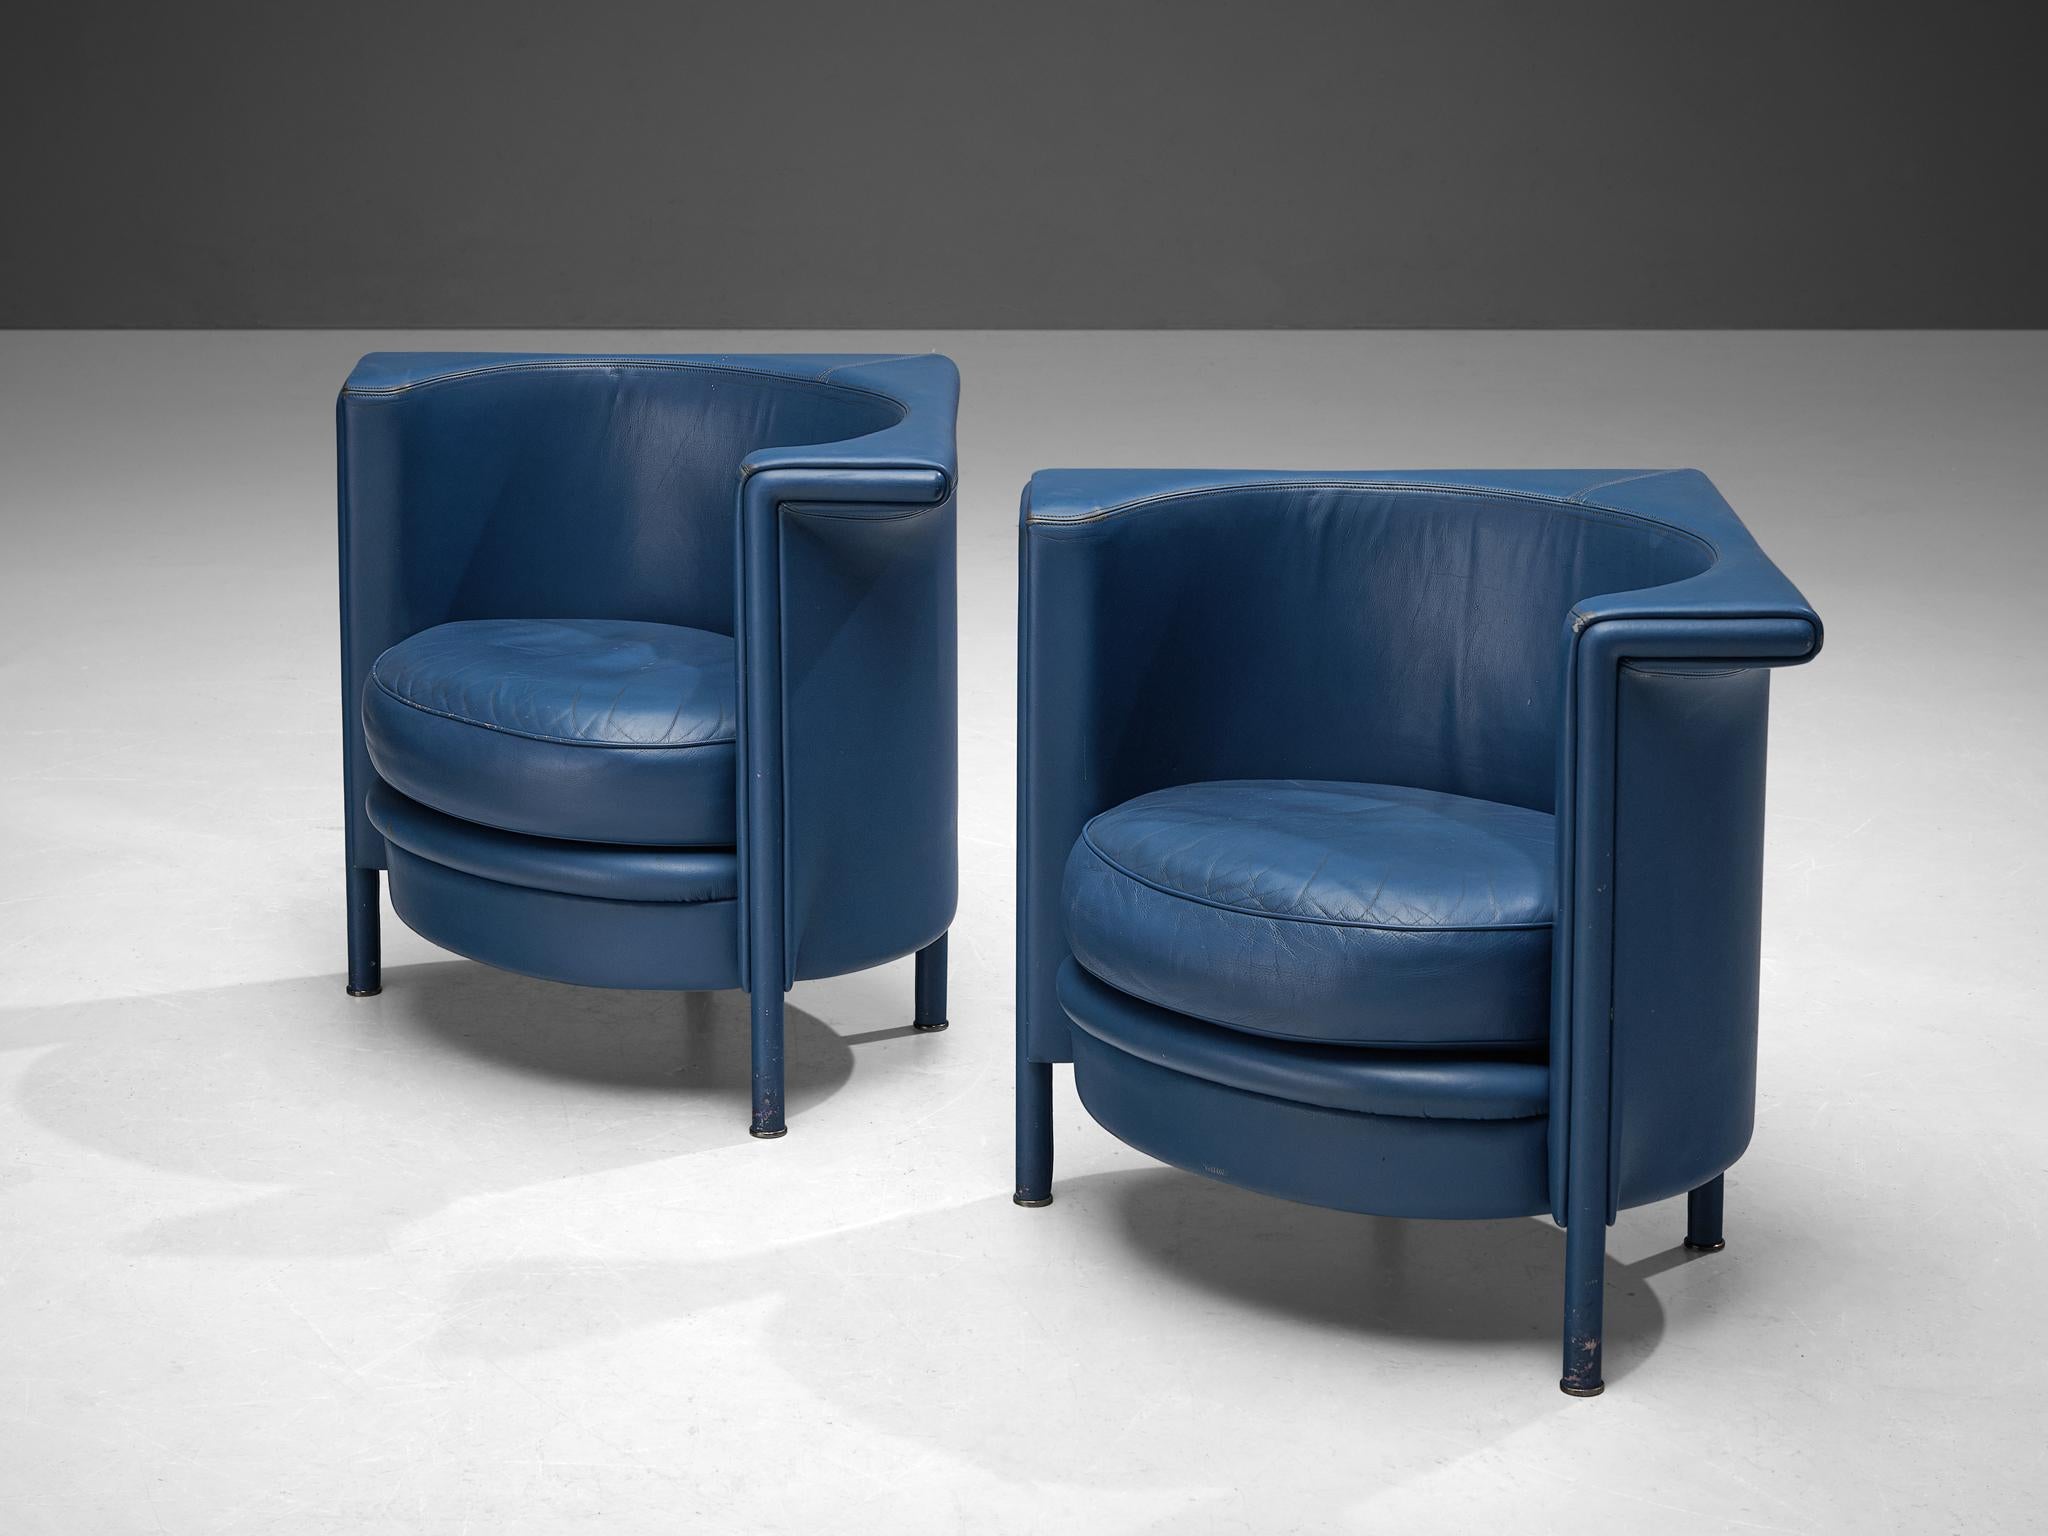 Antonio Citterio for Moroso, lounge chairs, leather, metal, wood, Italy, 1980s.

Interestingly shaped blue leather armchairs by Italian designer Antonio Citterio for manufacturer Moroso. The base and seat of the chair are in formed in a round shape,